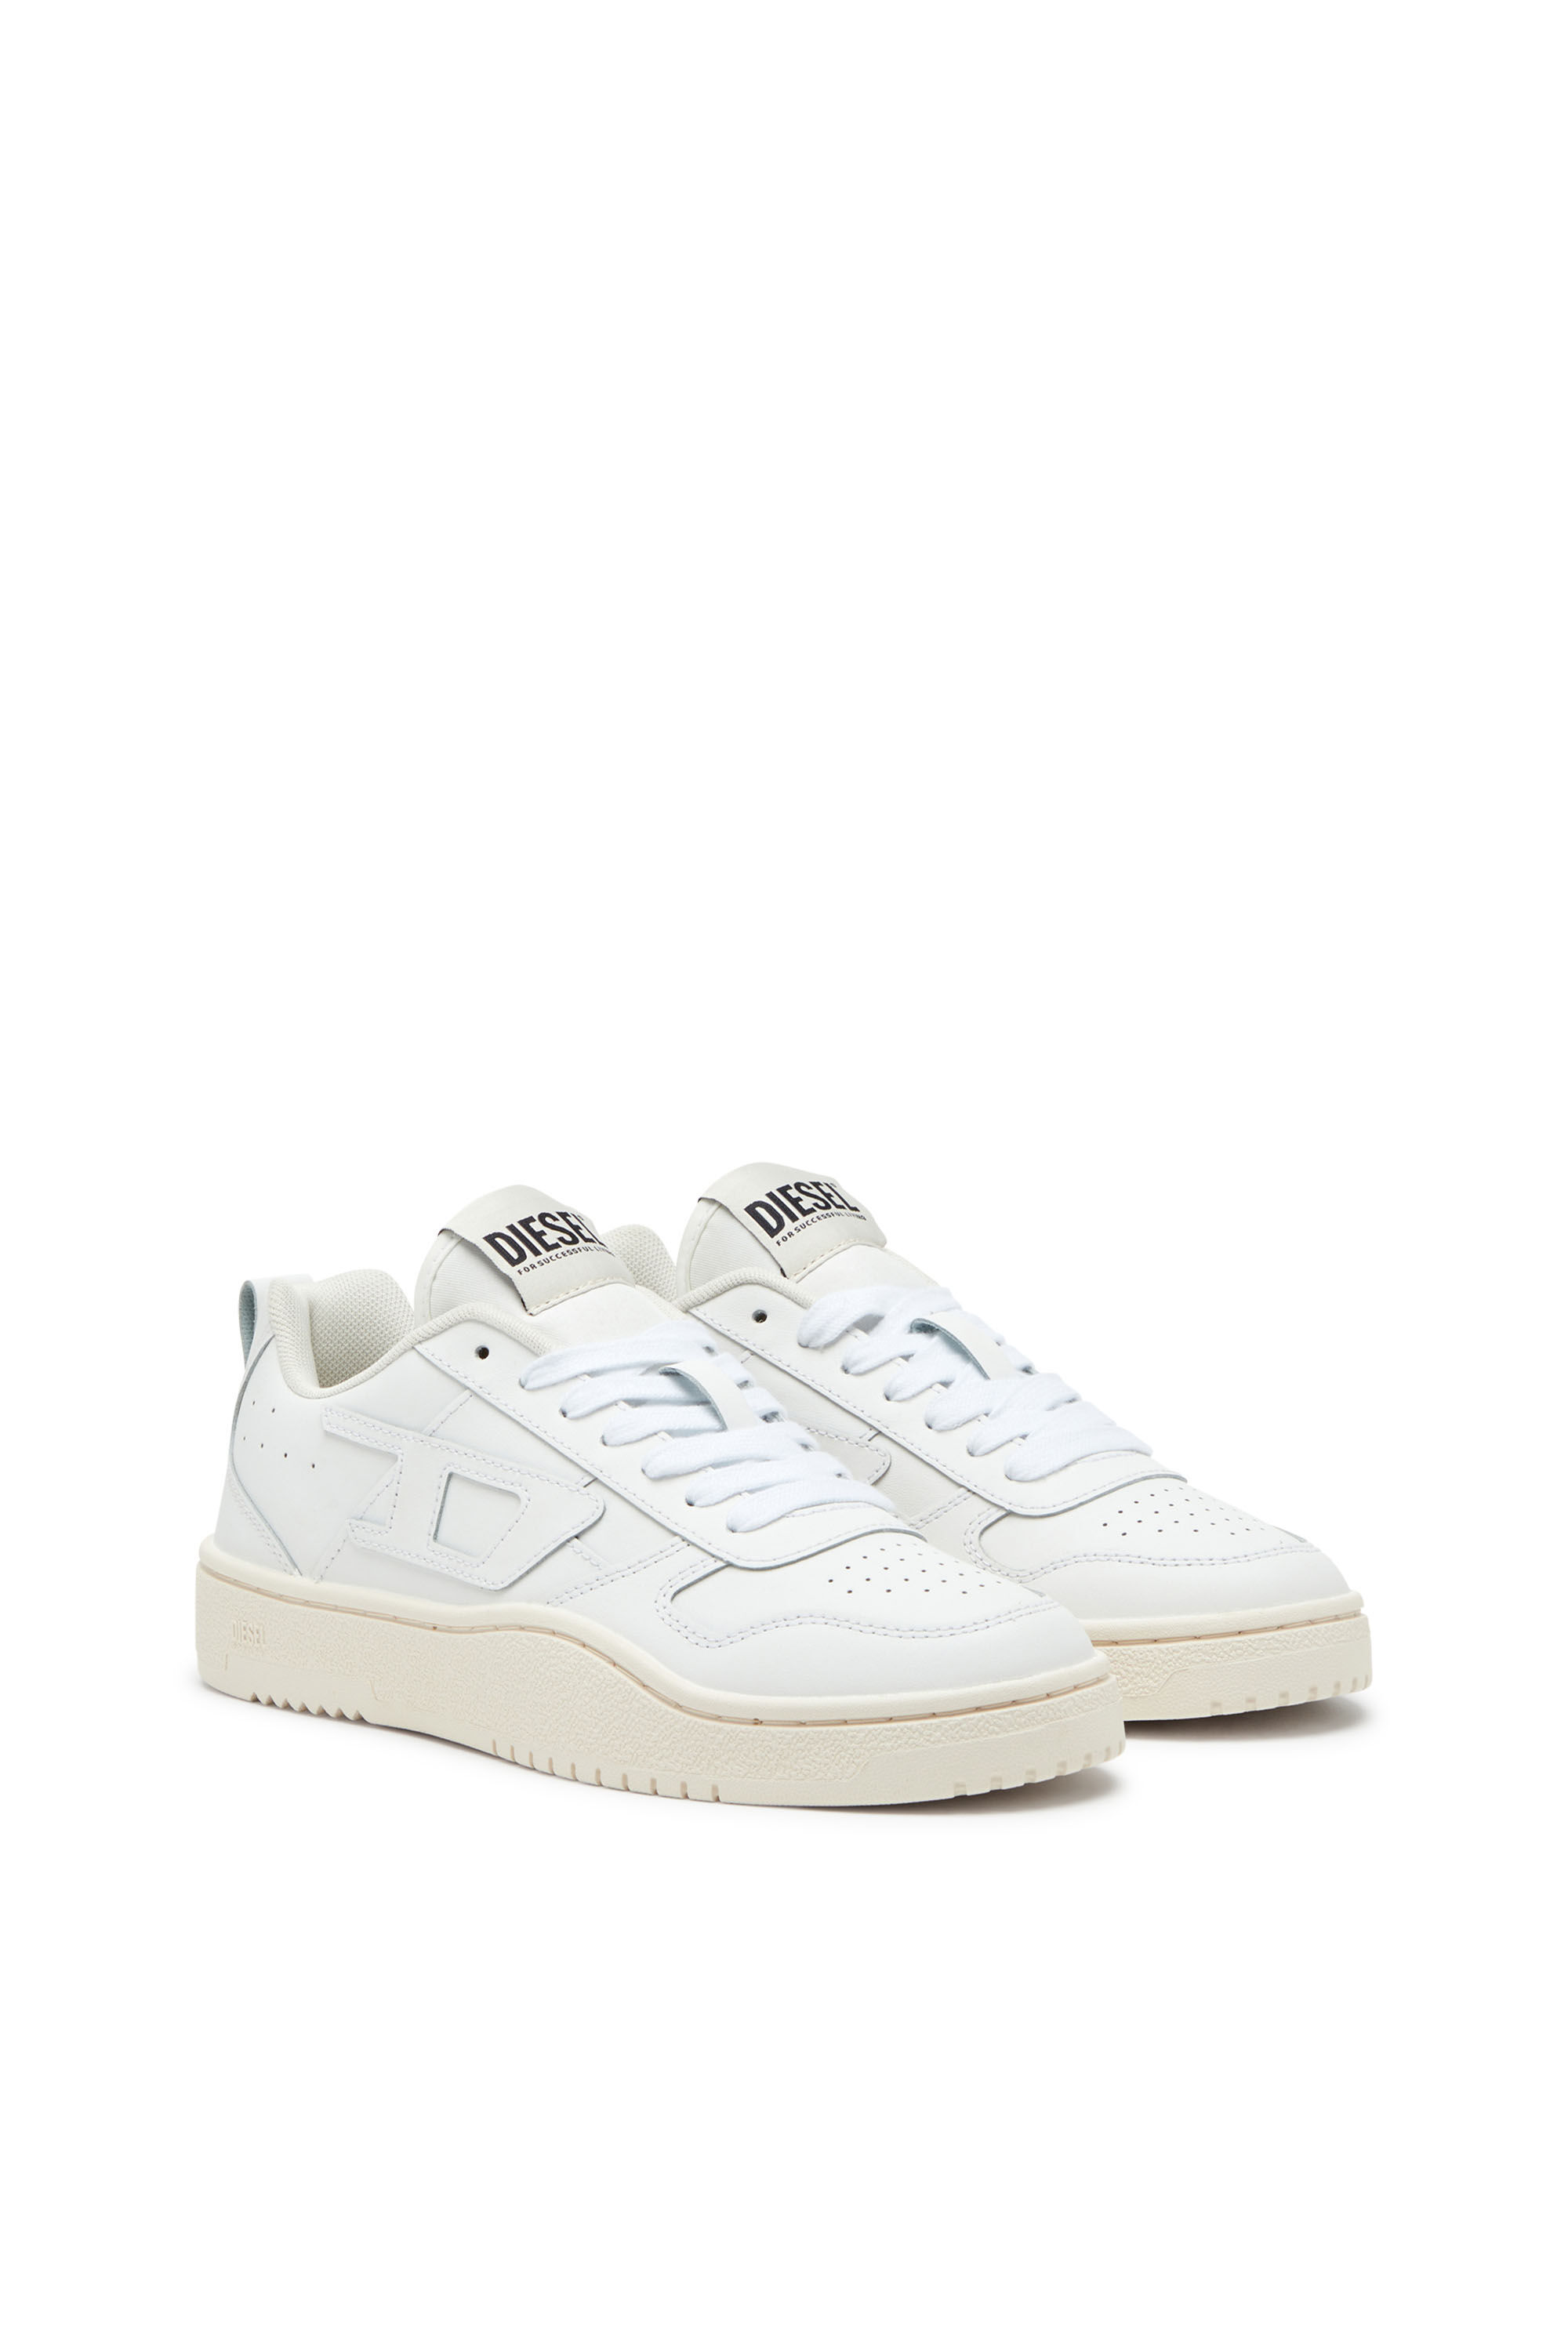 Diesel - S-UKIYO V2 LOW, Man S-Ukiyo Low-Low-top sneakers in leather and nylon in White - Image 2